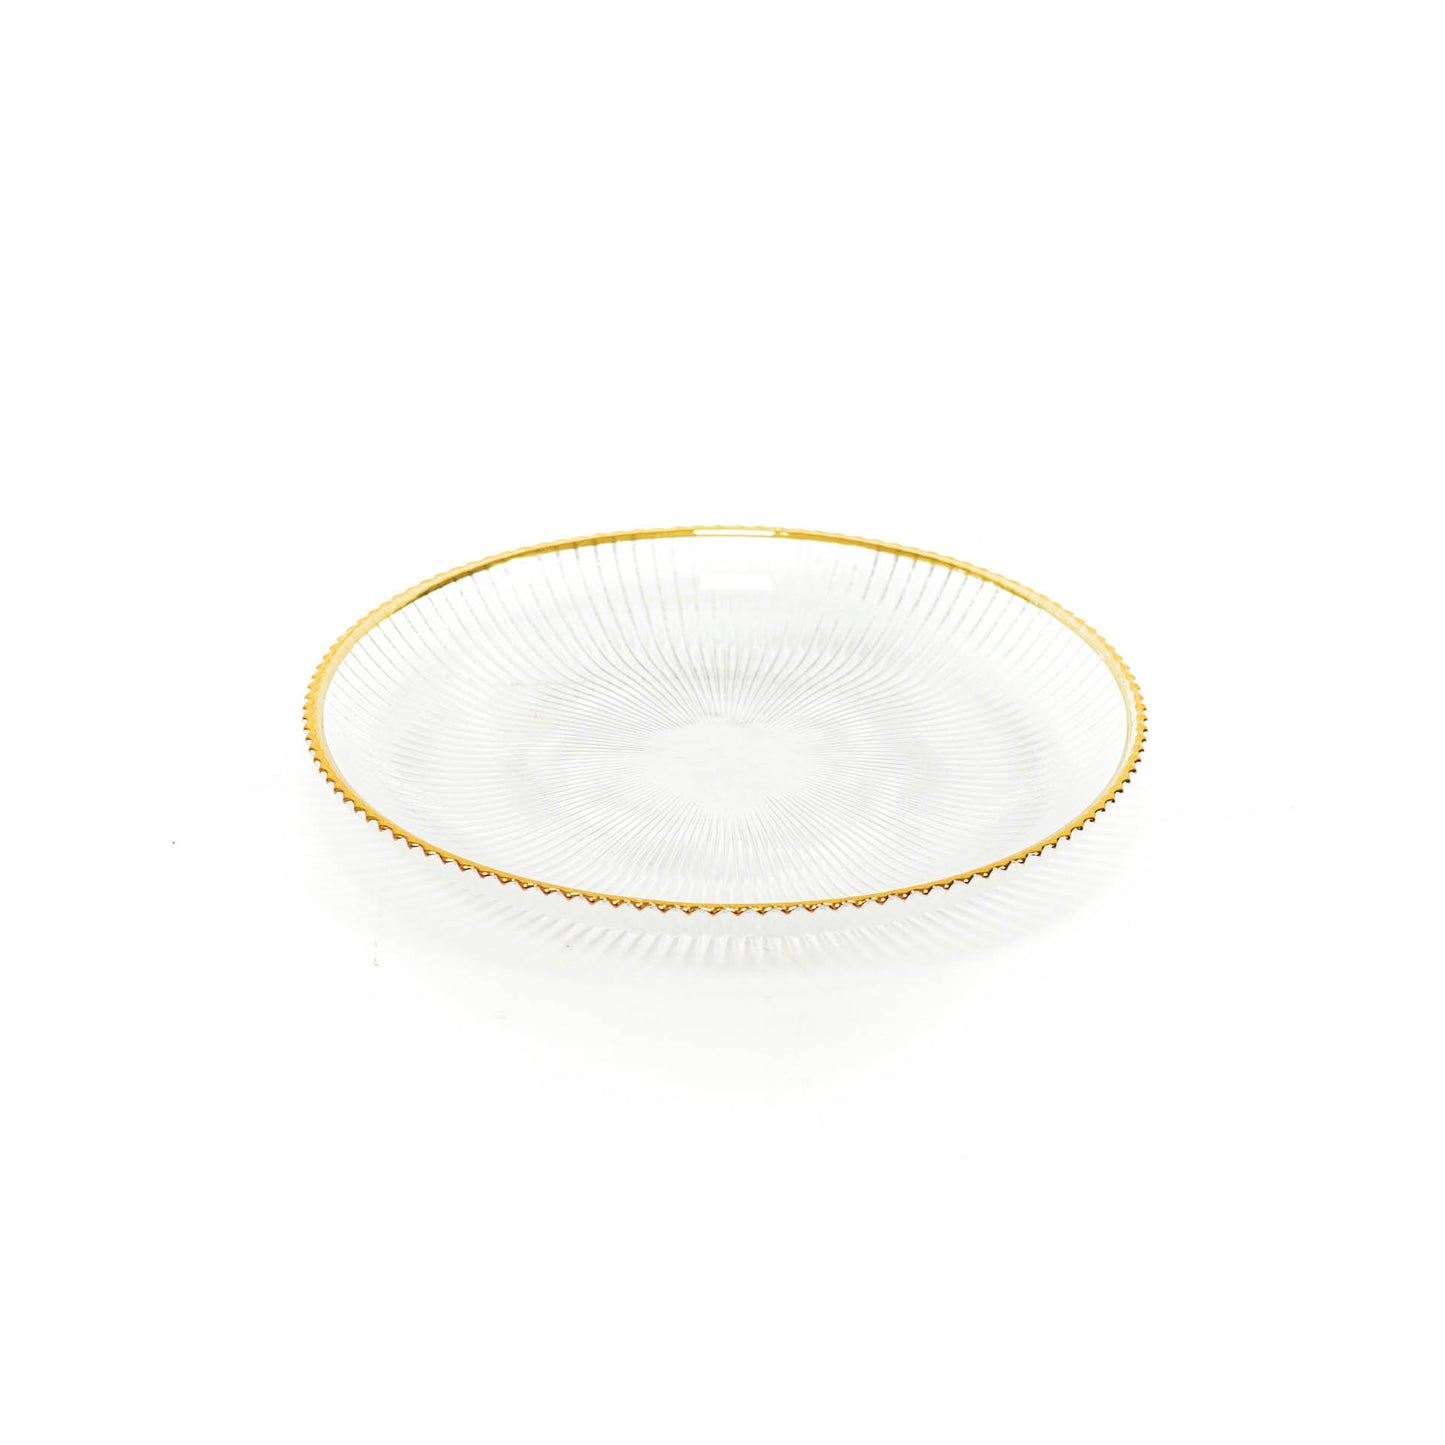 HV Dinnerplate of glass with golden rim - 20.5x2.5cm